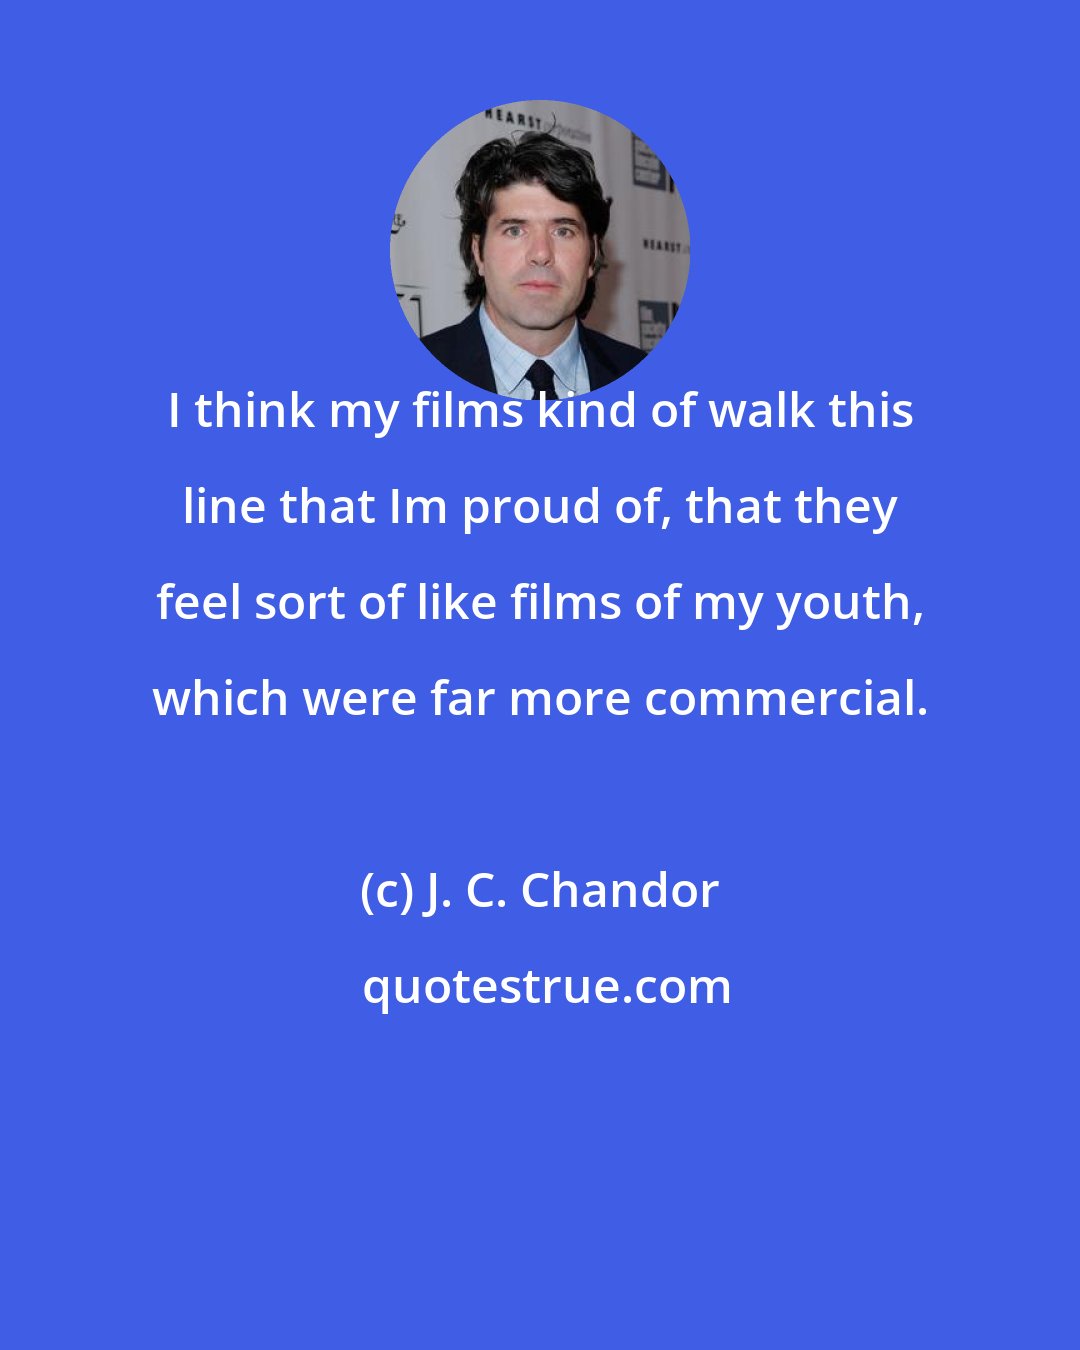 J. C. Chandor: I think my films kind of walk this line that Im proud of, that they feel sort of like films of my youth, which were far more commercial.